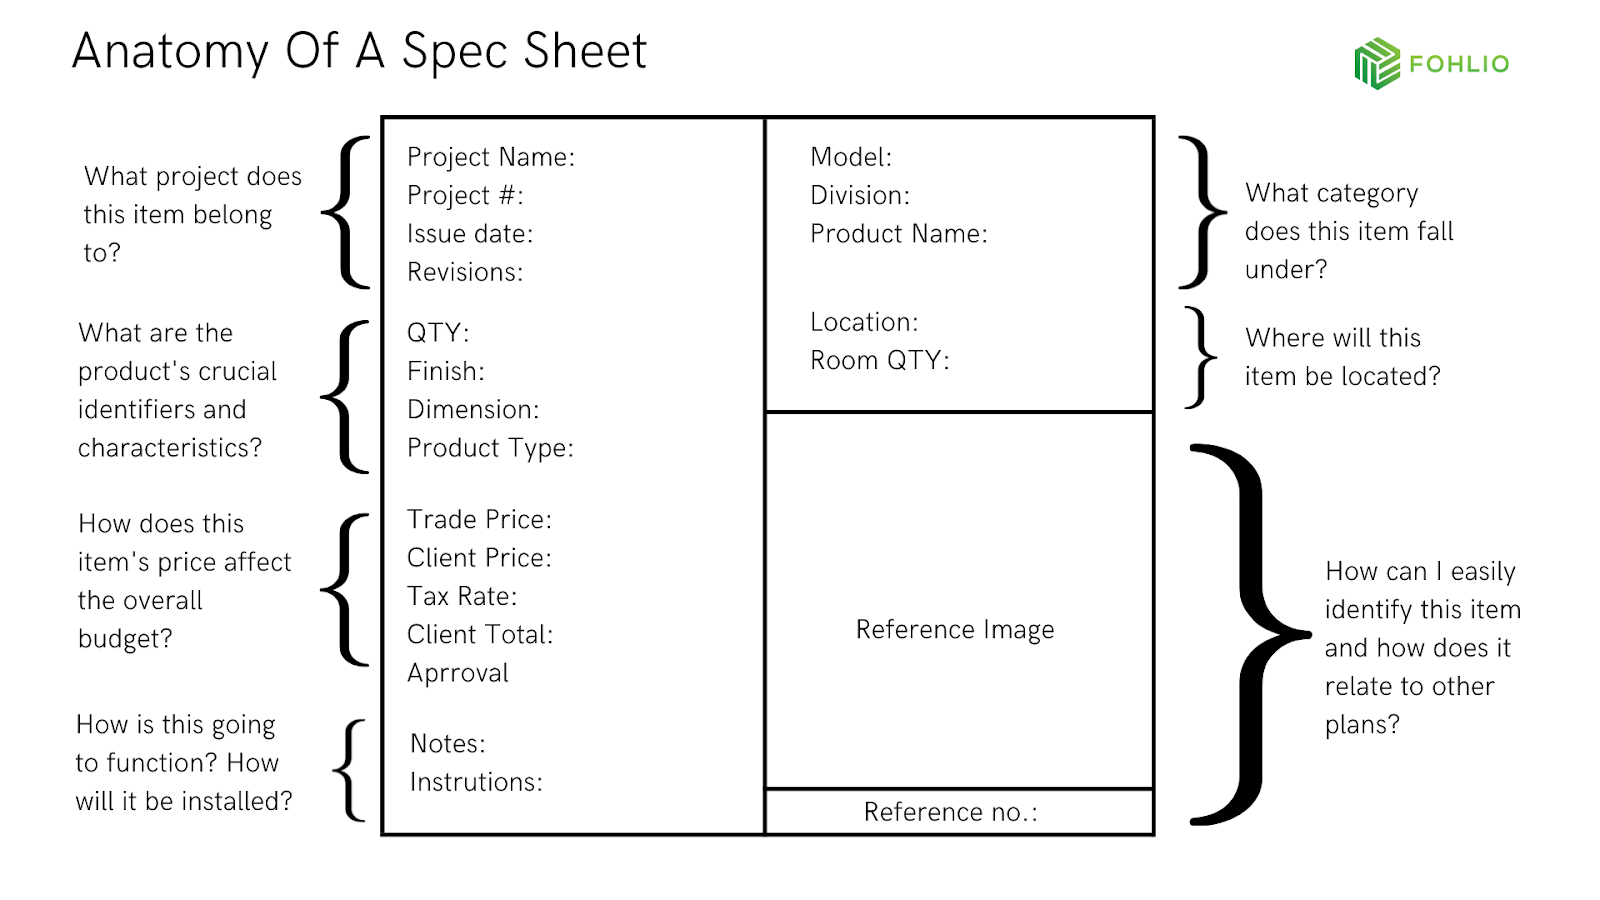 A Complete Guide to FF&E Spec Sheets | Fohlio | anatomy of a spec sheet